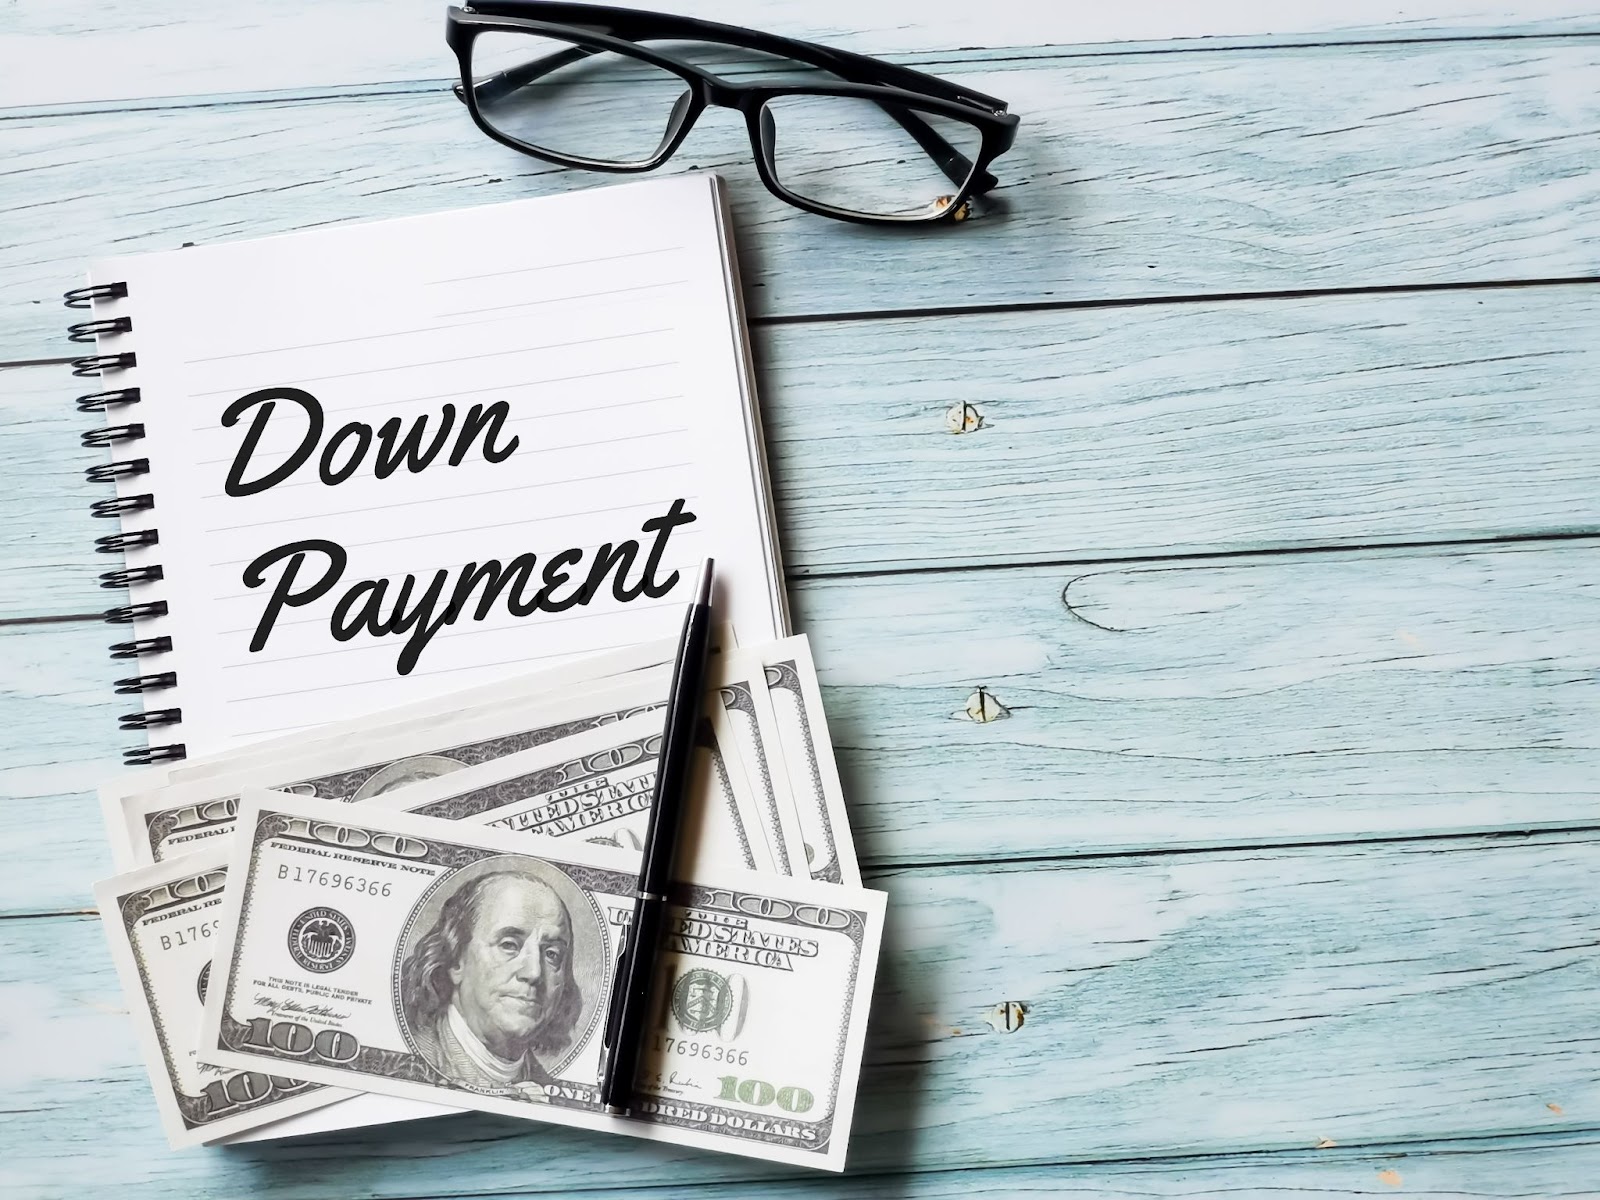 Down Payment can effect Home Buyer Negotiations